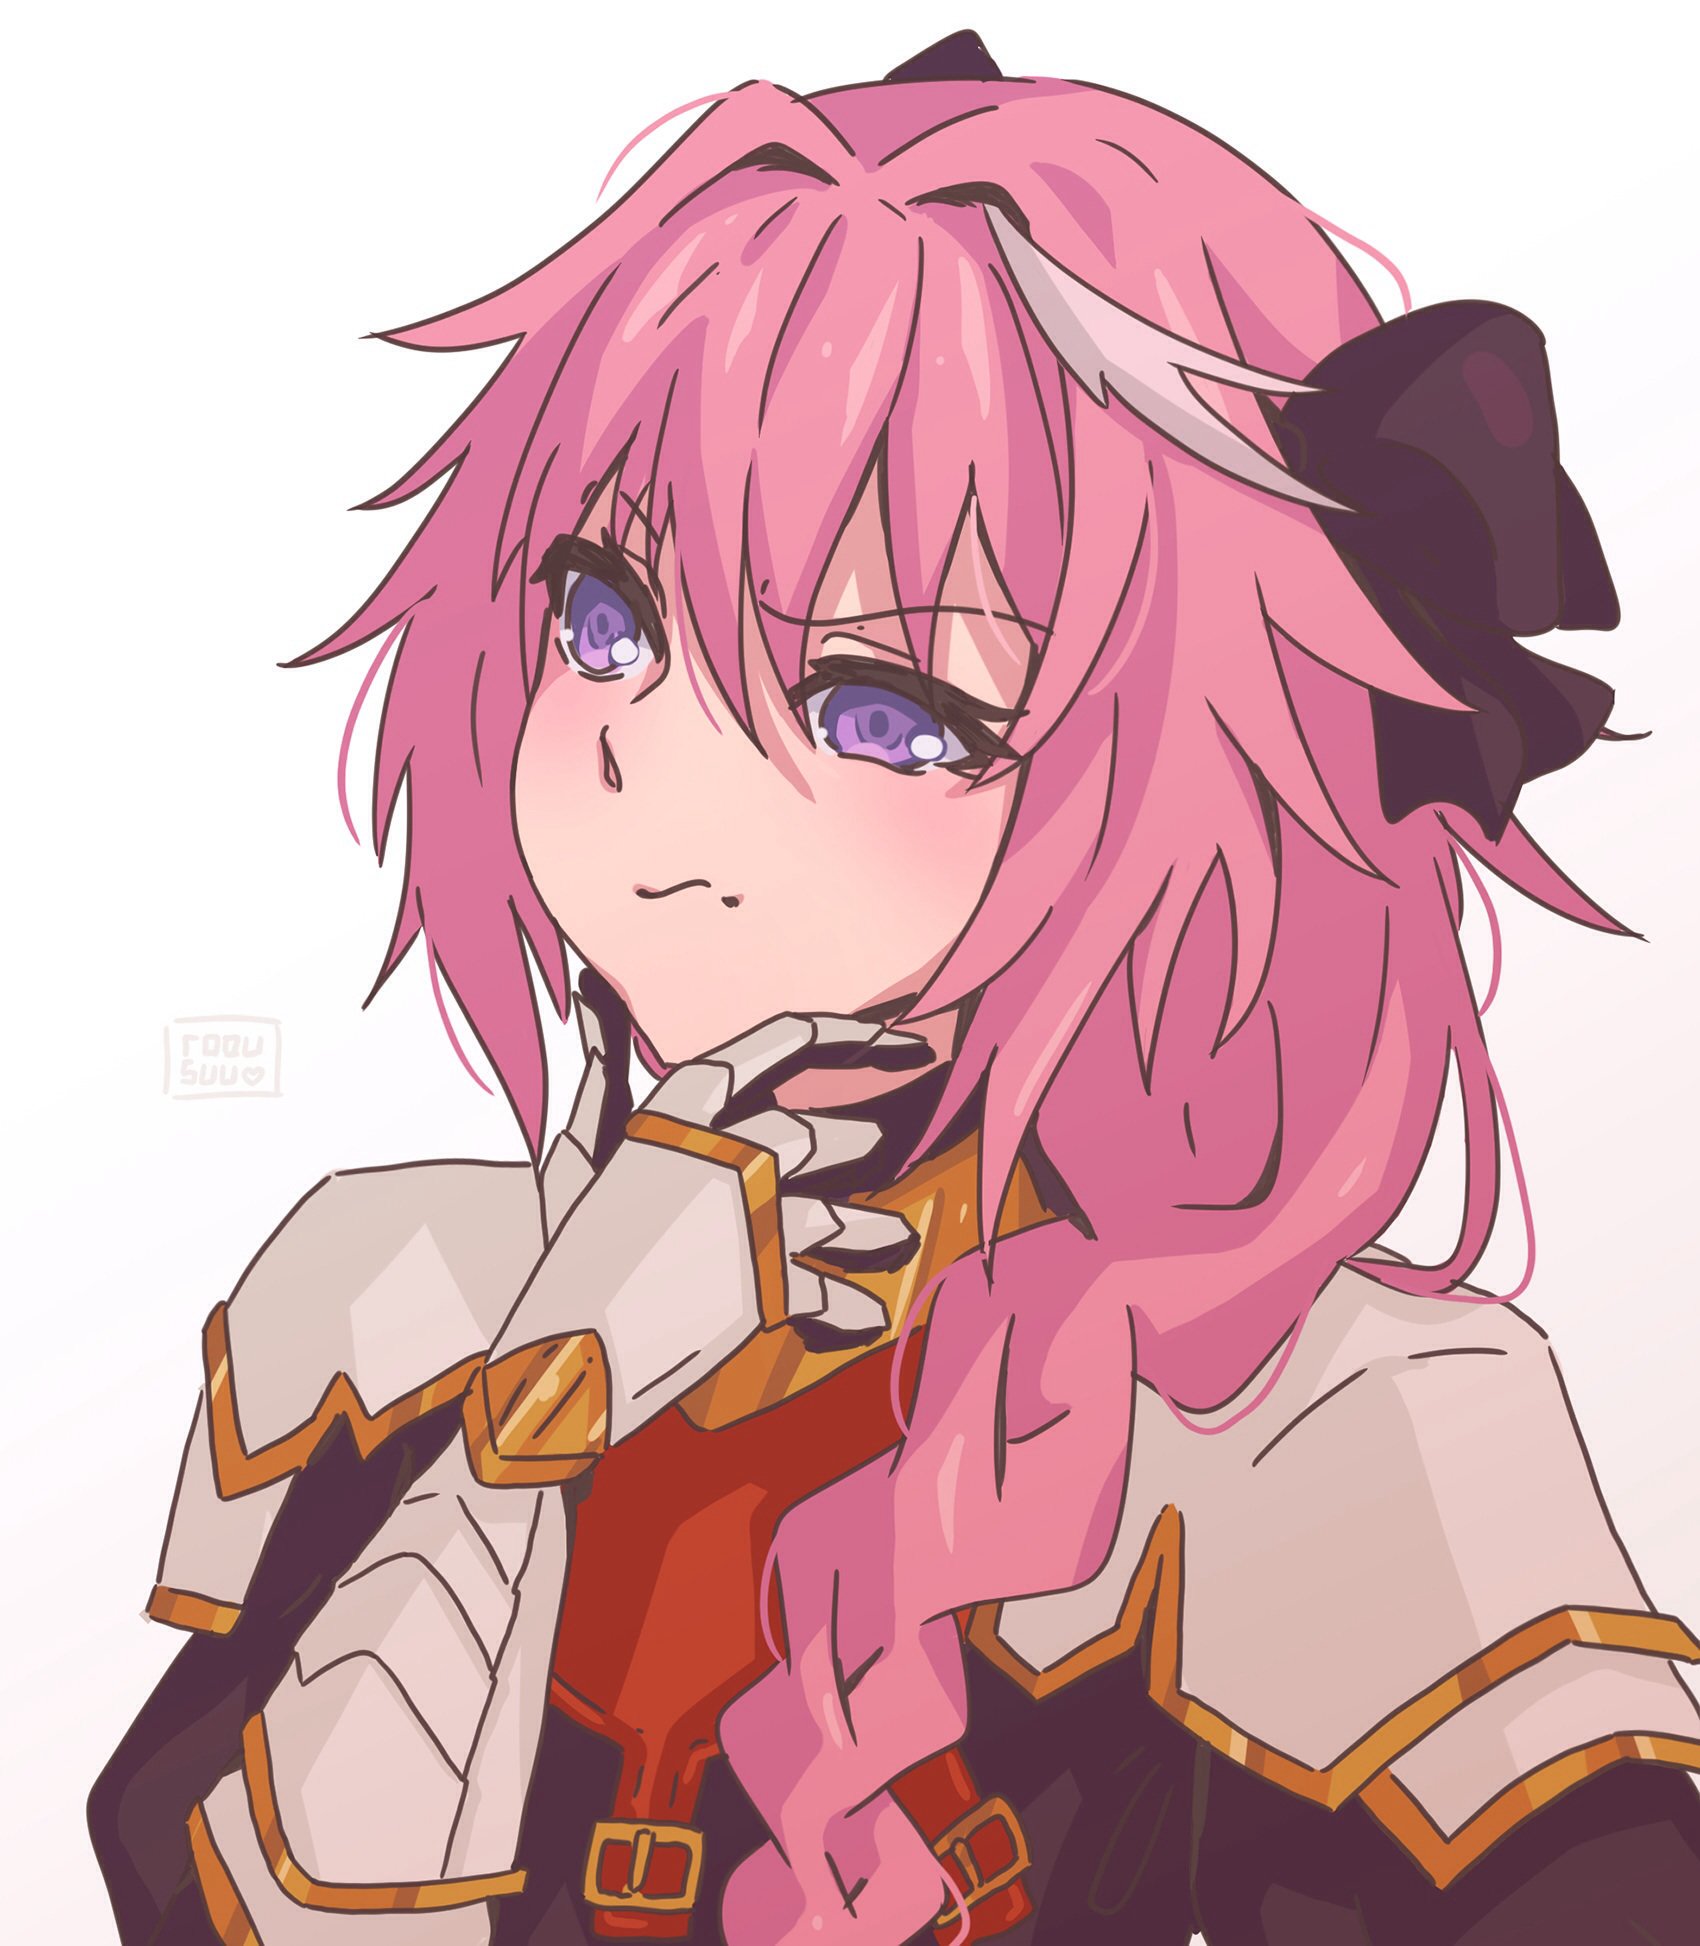 Anime 1700x1946 Fate/Apocrypha  Fate/Grand Order Fate series two tone hair french braids hair bows armor gauntlets hand on face purple eyes looking away black ribbons 2D simple background Astolfo (Fate/Apocrypha) anime boys femboy bangs anime artwork fan art